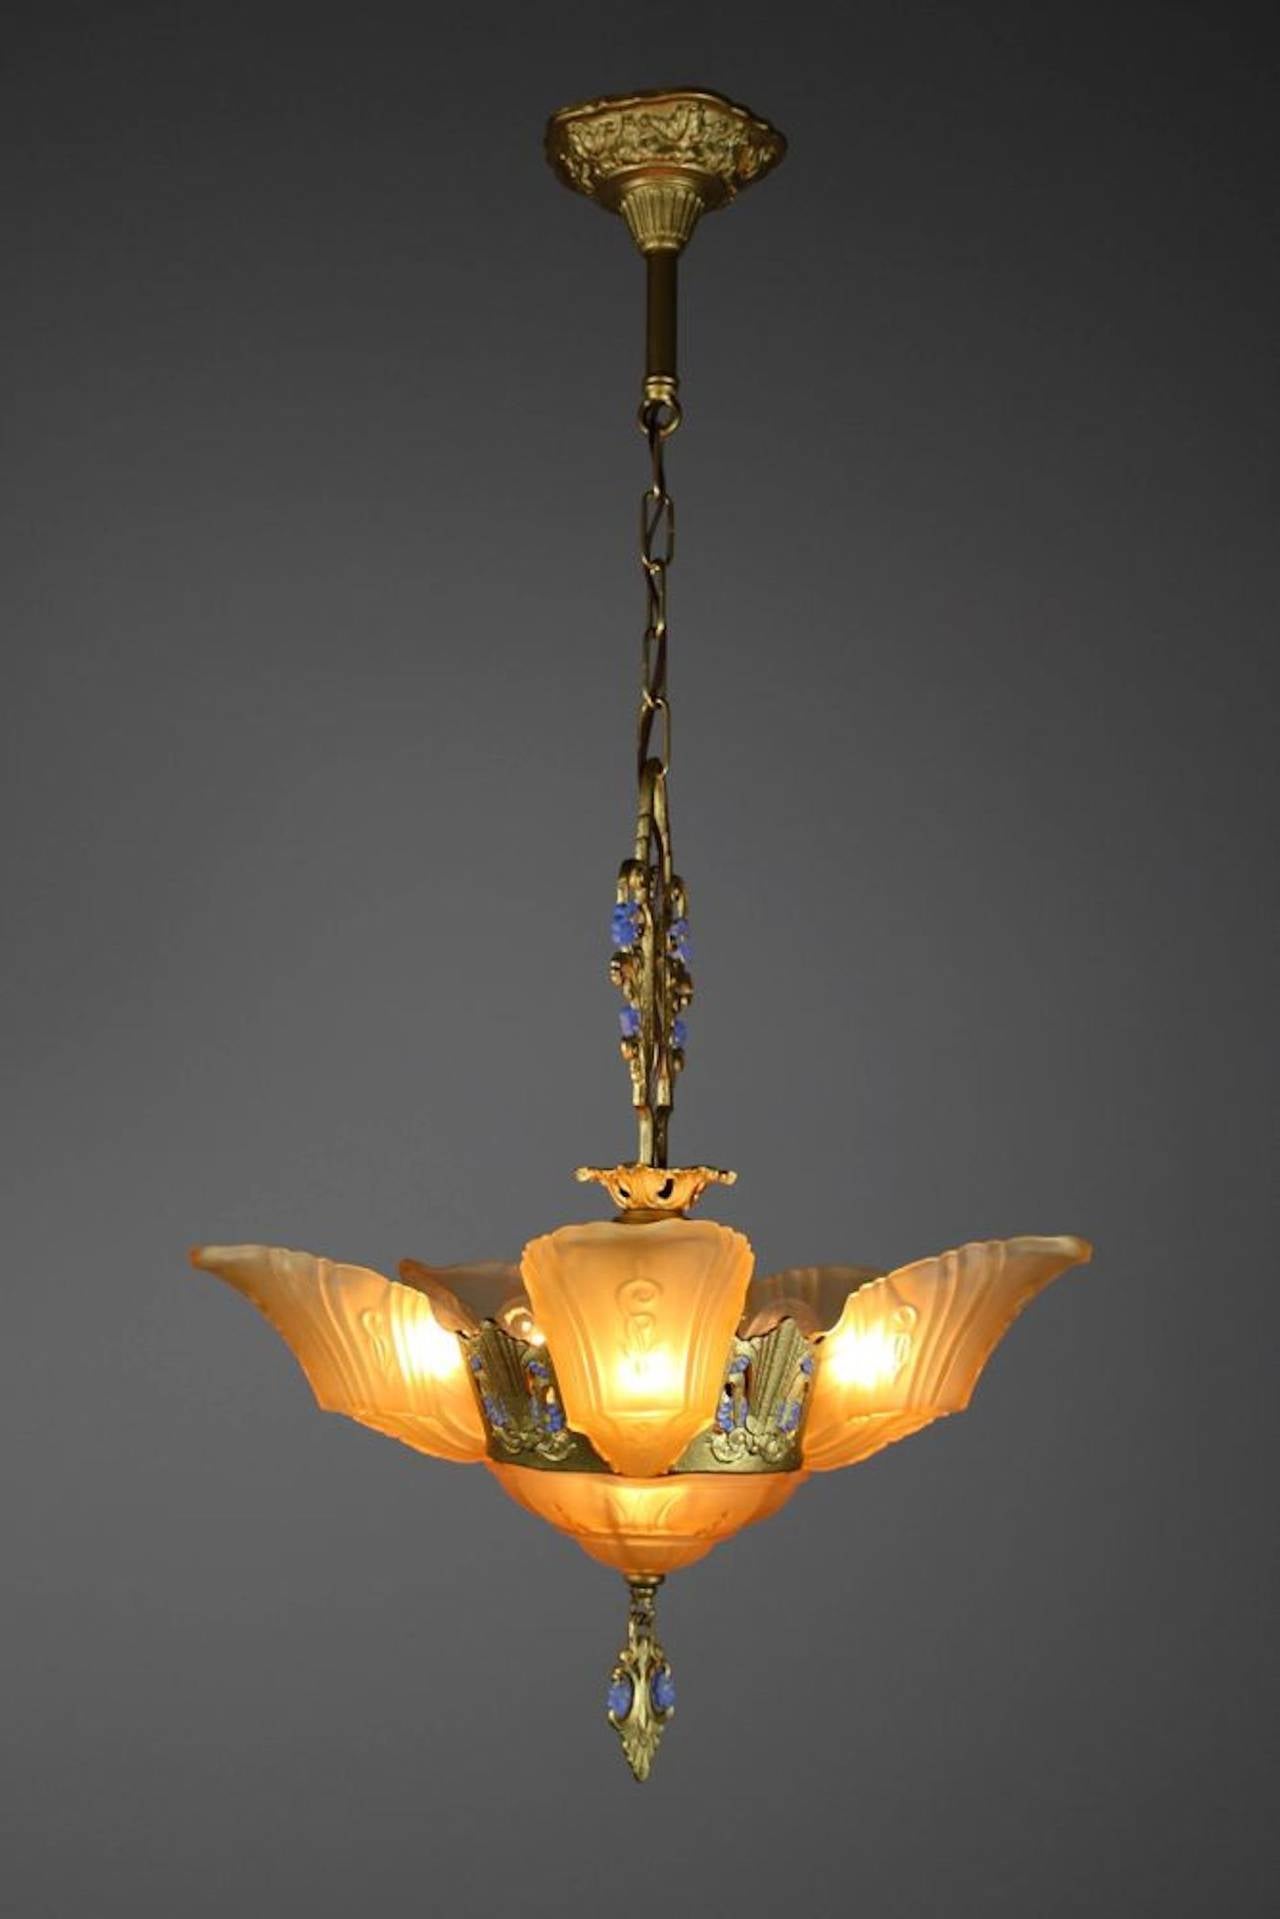 Fantastic original Art Deco slip shade chandelier, circa 1920 with powder blue floral motif. This lovely light came out of a heritage home in Ontario, Canada. It has been newly restored, rewired, and is ready to hang. 

Measurements: 39